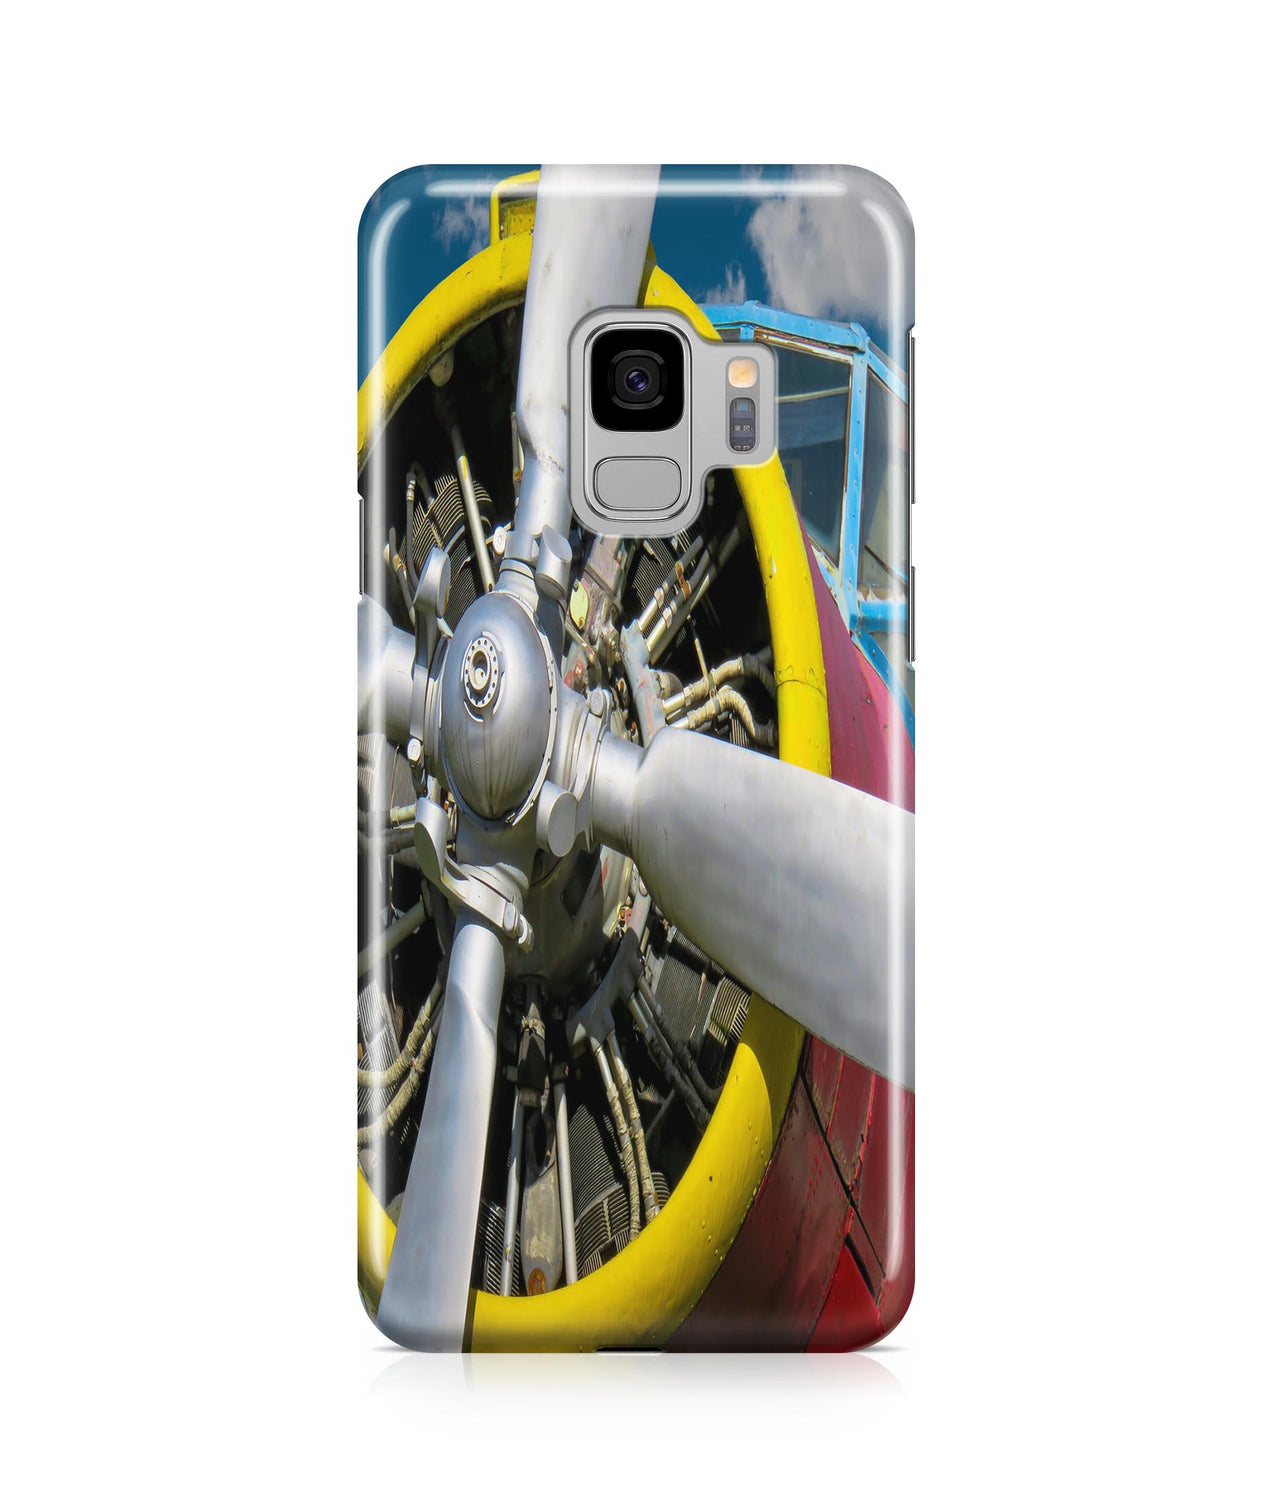 Double-Decker Airplane's Propeller Printed Samsung J Cases